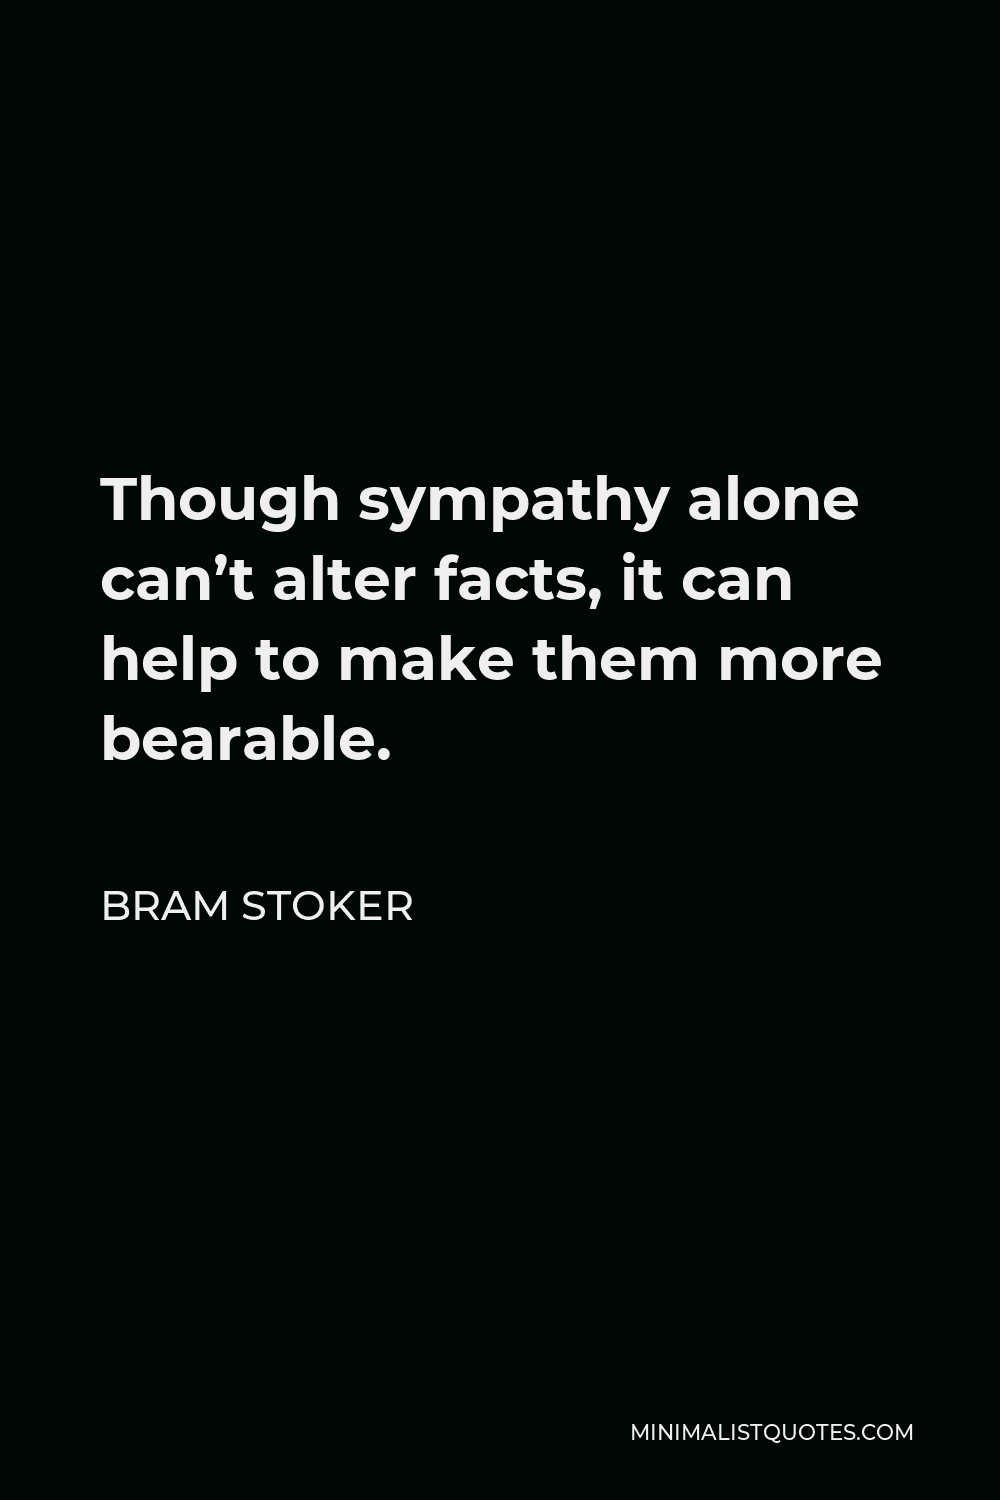 Bram Stoker Quote - Though sympathy alone can’t alter facts, it can help to make them more bearable.